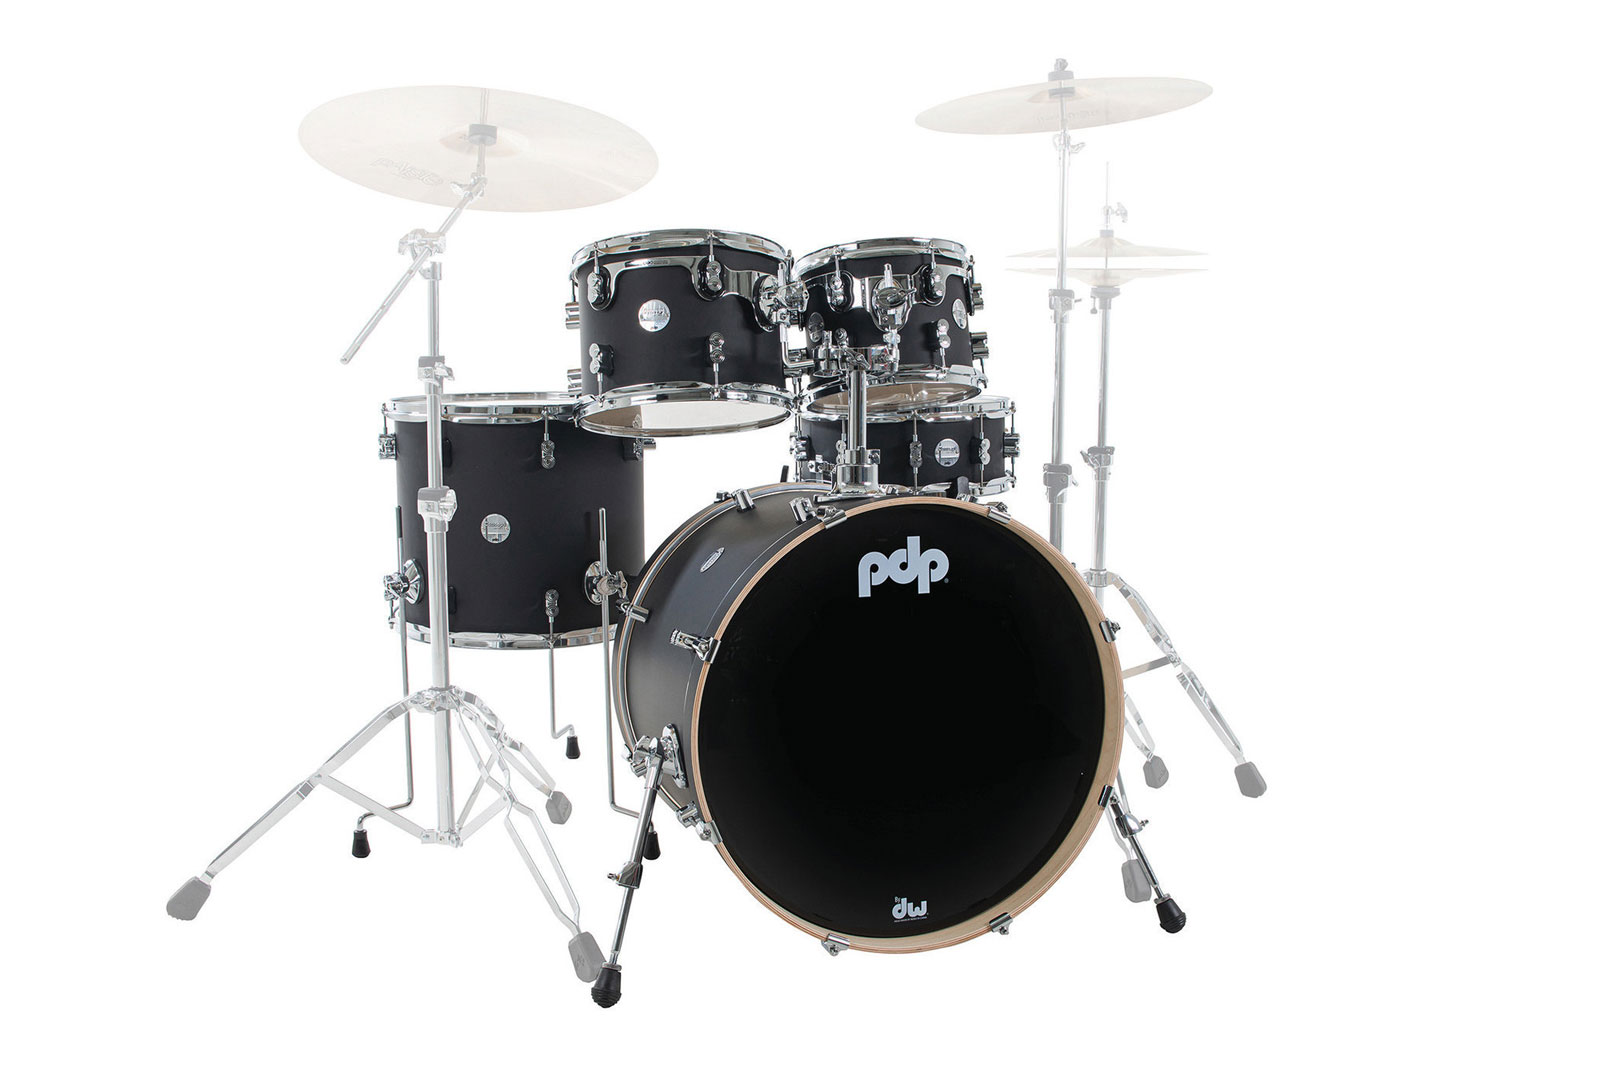 PDP BY DW SHELL SET CONCEPT MAPLE FINISH PLY CM5 KIT 22